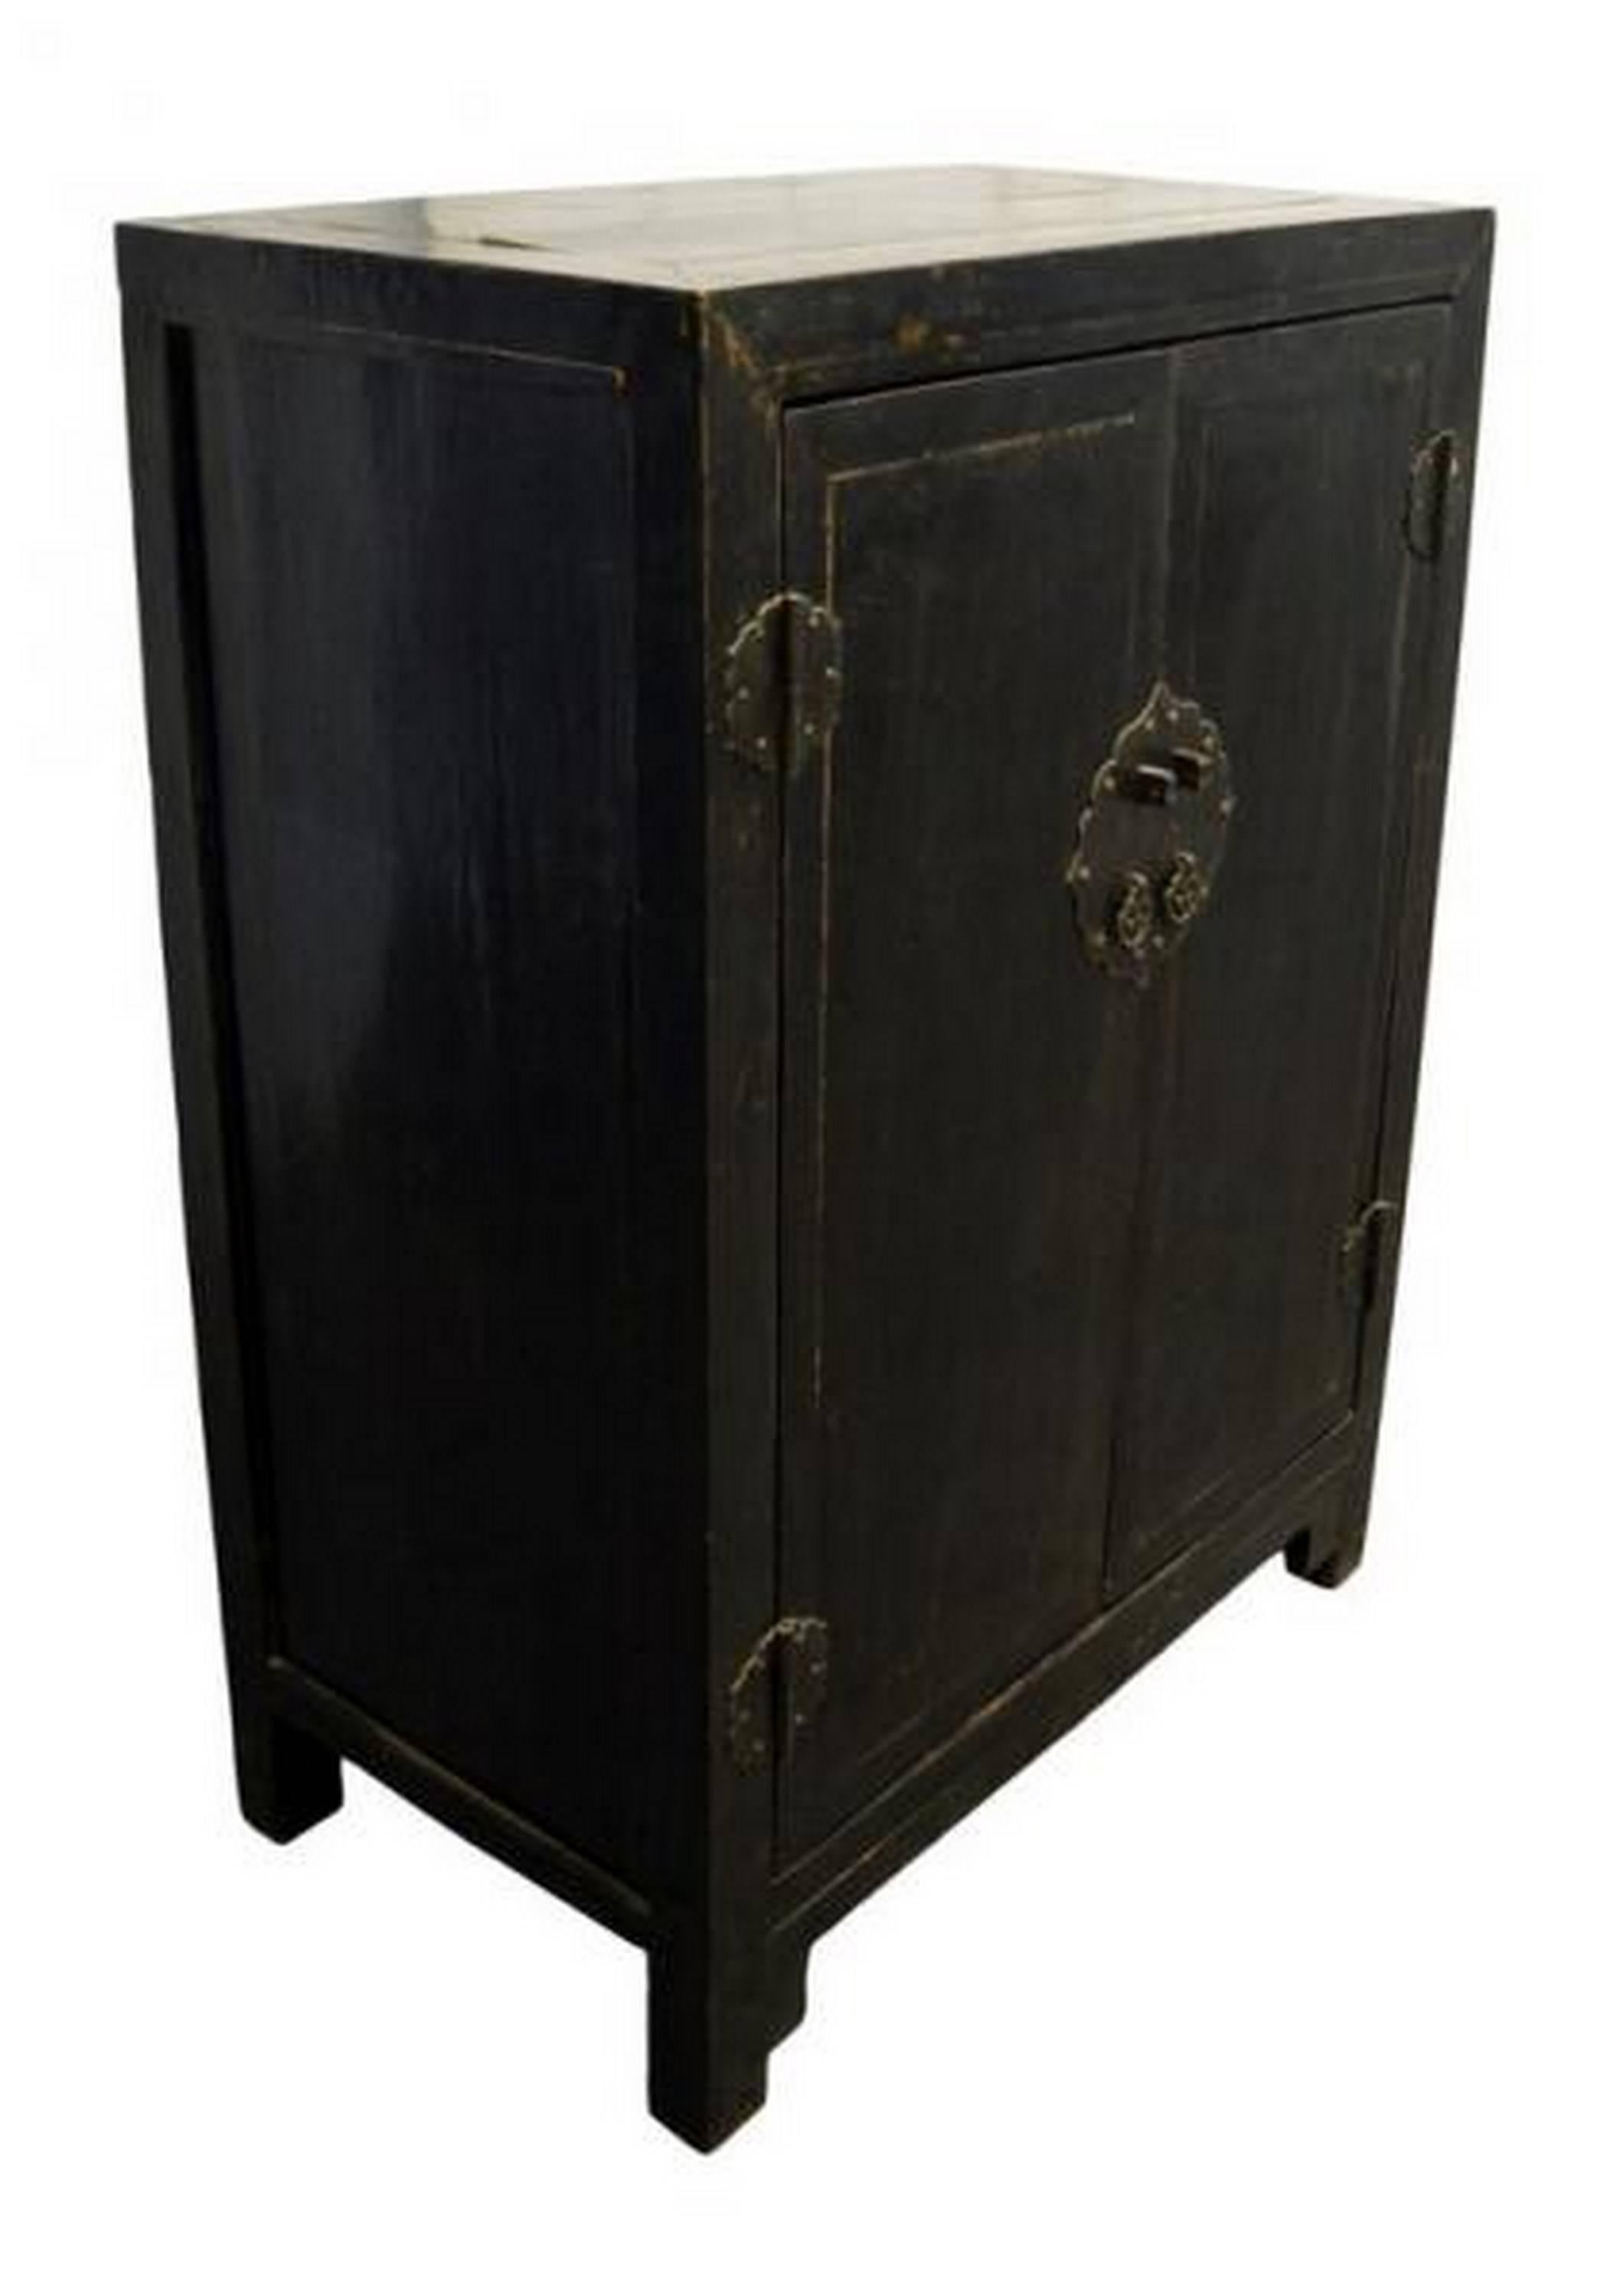 A 19th century Chinese side cabinet with black lacquered wood and brass hardware. This cabinet adopts a typically Chinese refined rectangular shape. The two doors open thanks to a carved brass hardware lockset with two ring pull handles. The four